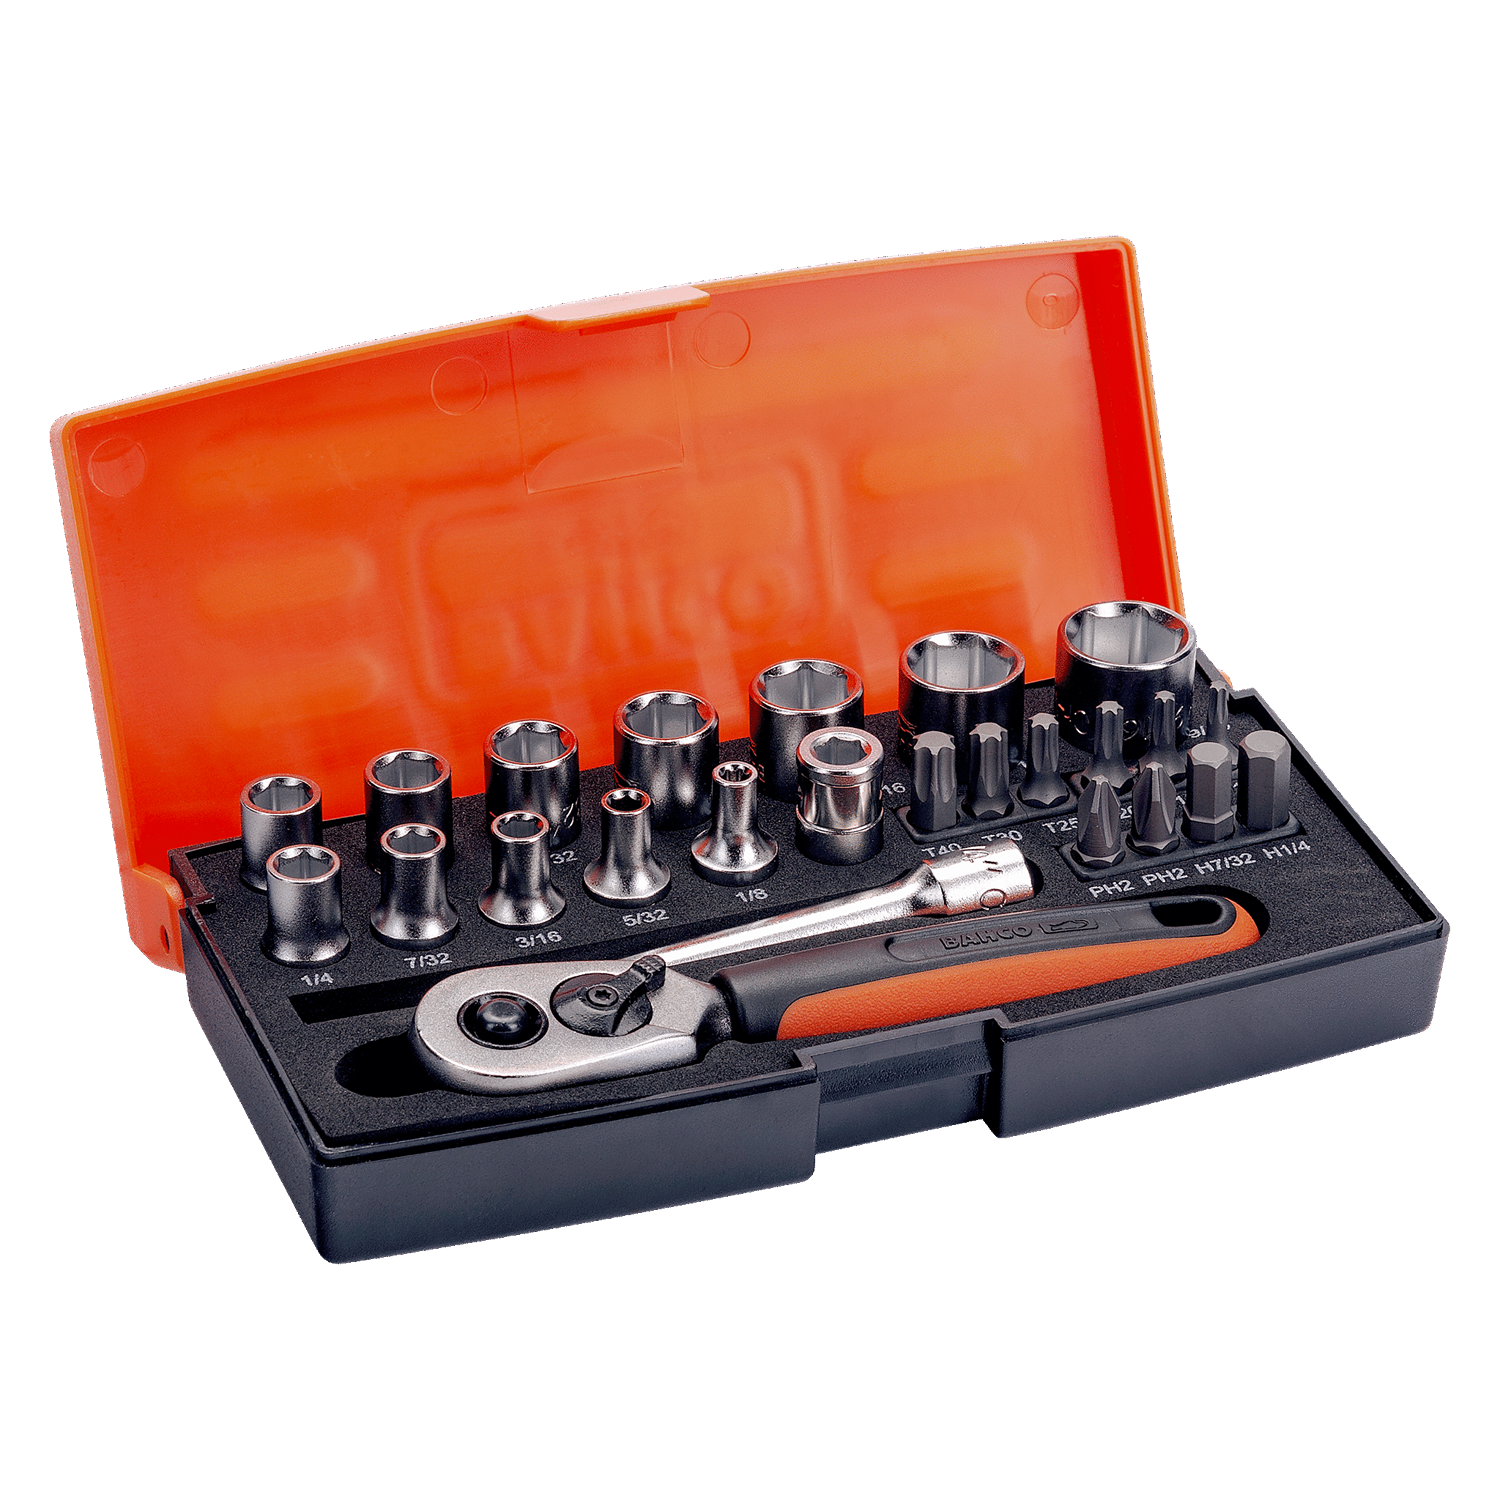 BAHCO SL25AF 1/4” Square Drive Socket Set Imperial Hex Profile - Premium Socket Set from BAHCO - Shop now at Yew Aik.